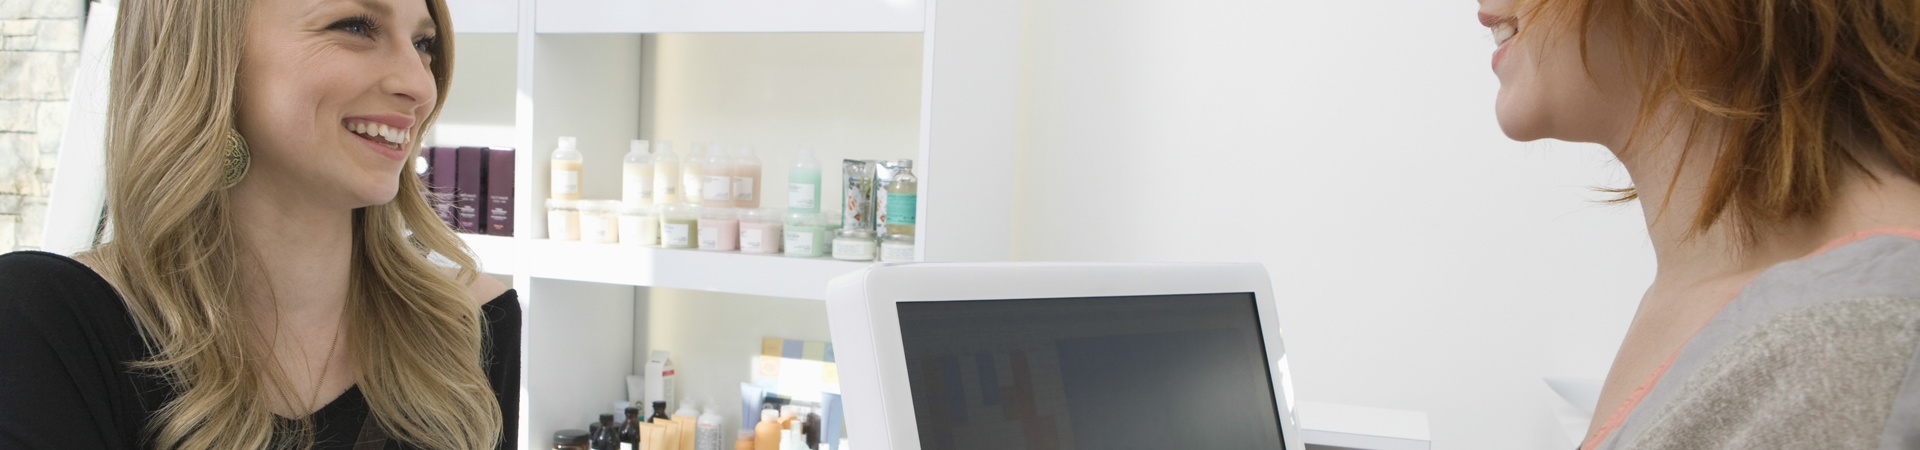 Management Software Implementation for a Beauty Stores Chain 